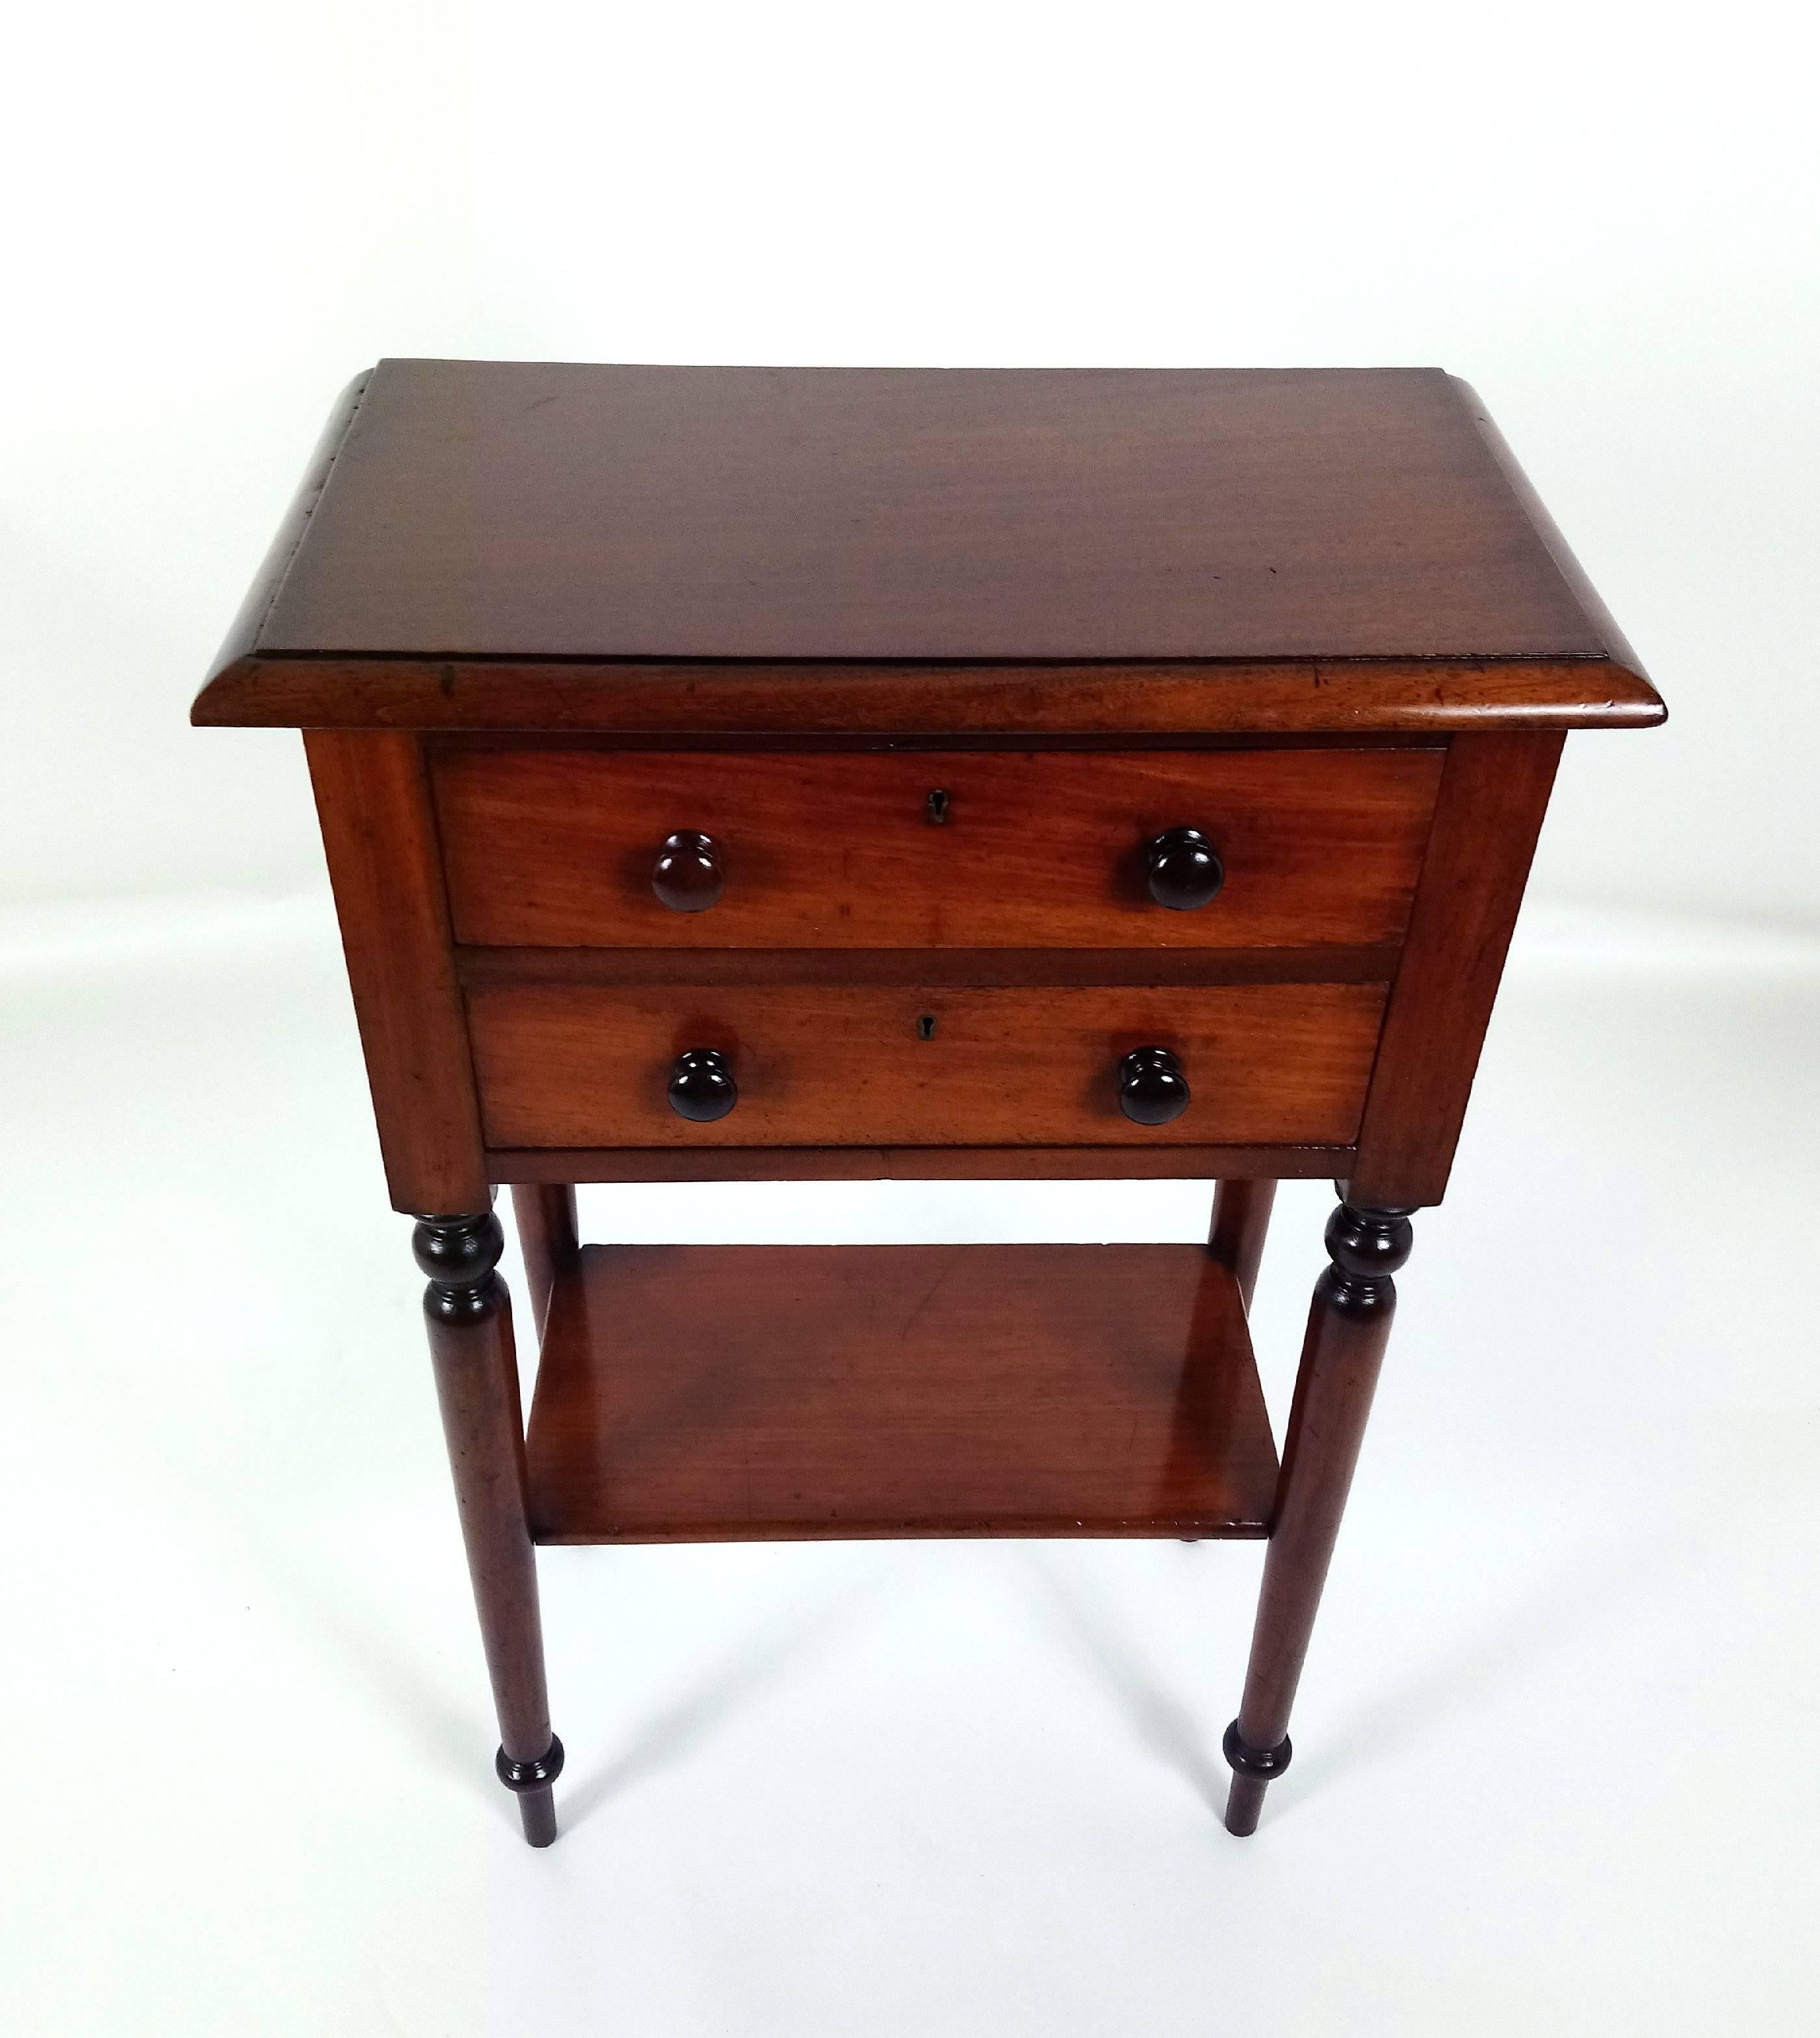 This charming and well-proportioned late Victorian English mahogany hall table is fitted with 2 top drawers on turned slender supports with an under tier shelf. The brass lock is stamped Hamptons, an English Locksmith of the period. It measures 23 ¼